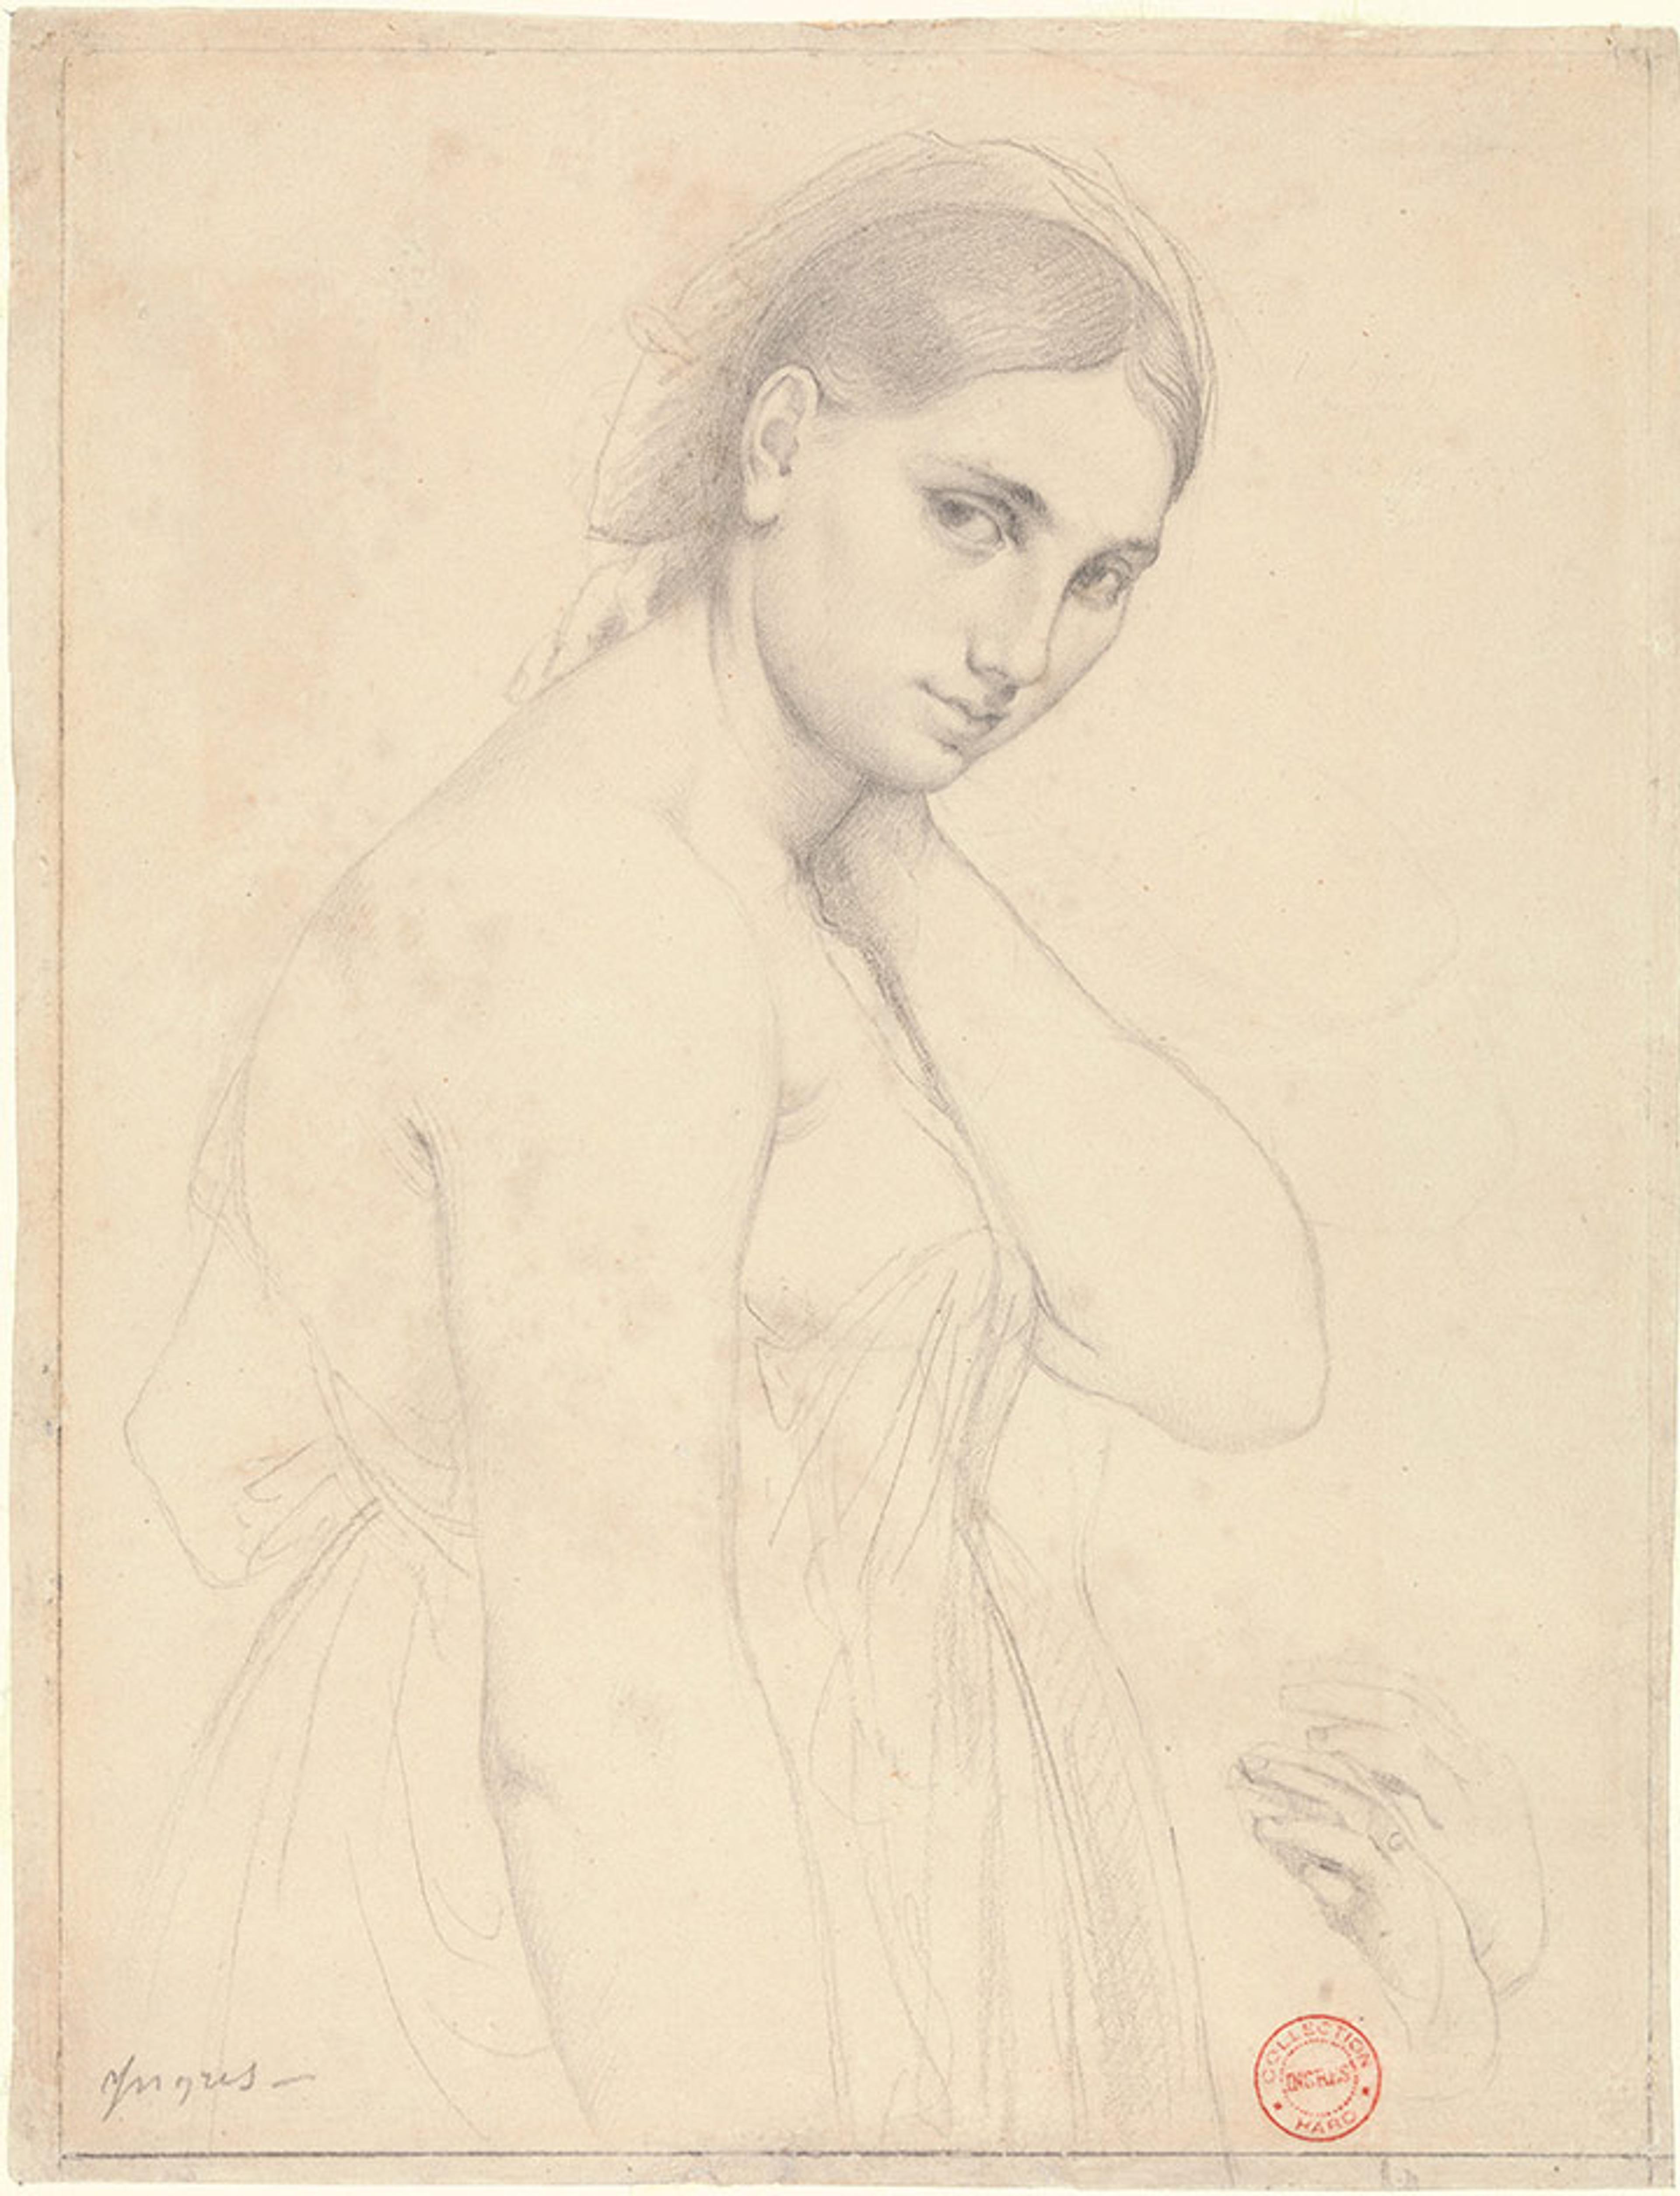 Study for Raphael and the Fornarina by Ingres